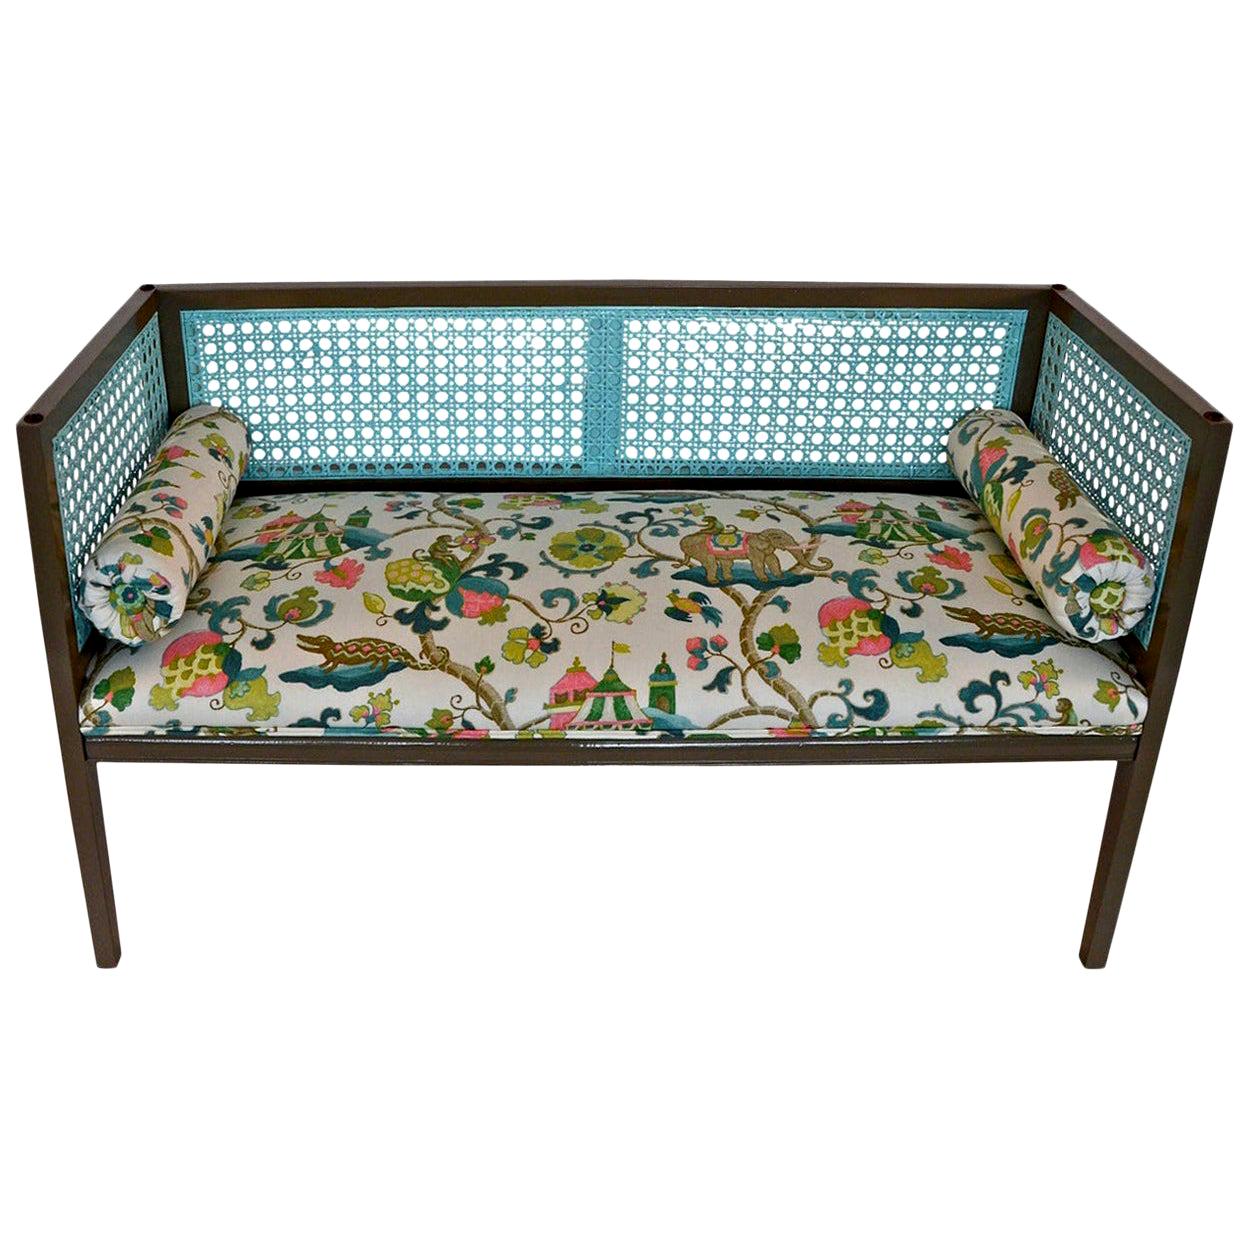 Khaki & Blue Lacquered Wood & Rattan with Pink, Yellow & Green Upholstery Settee For Sale